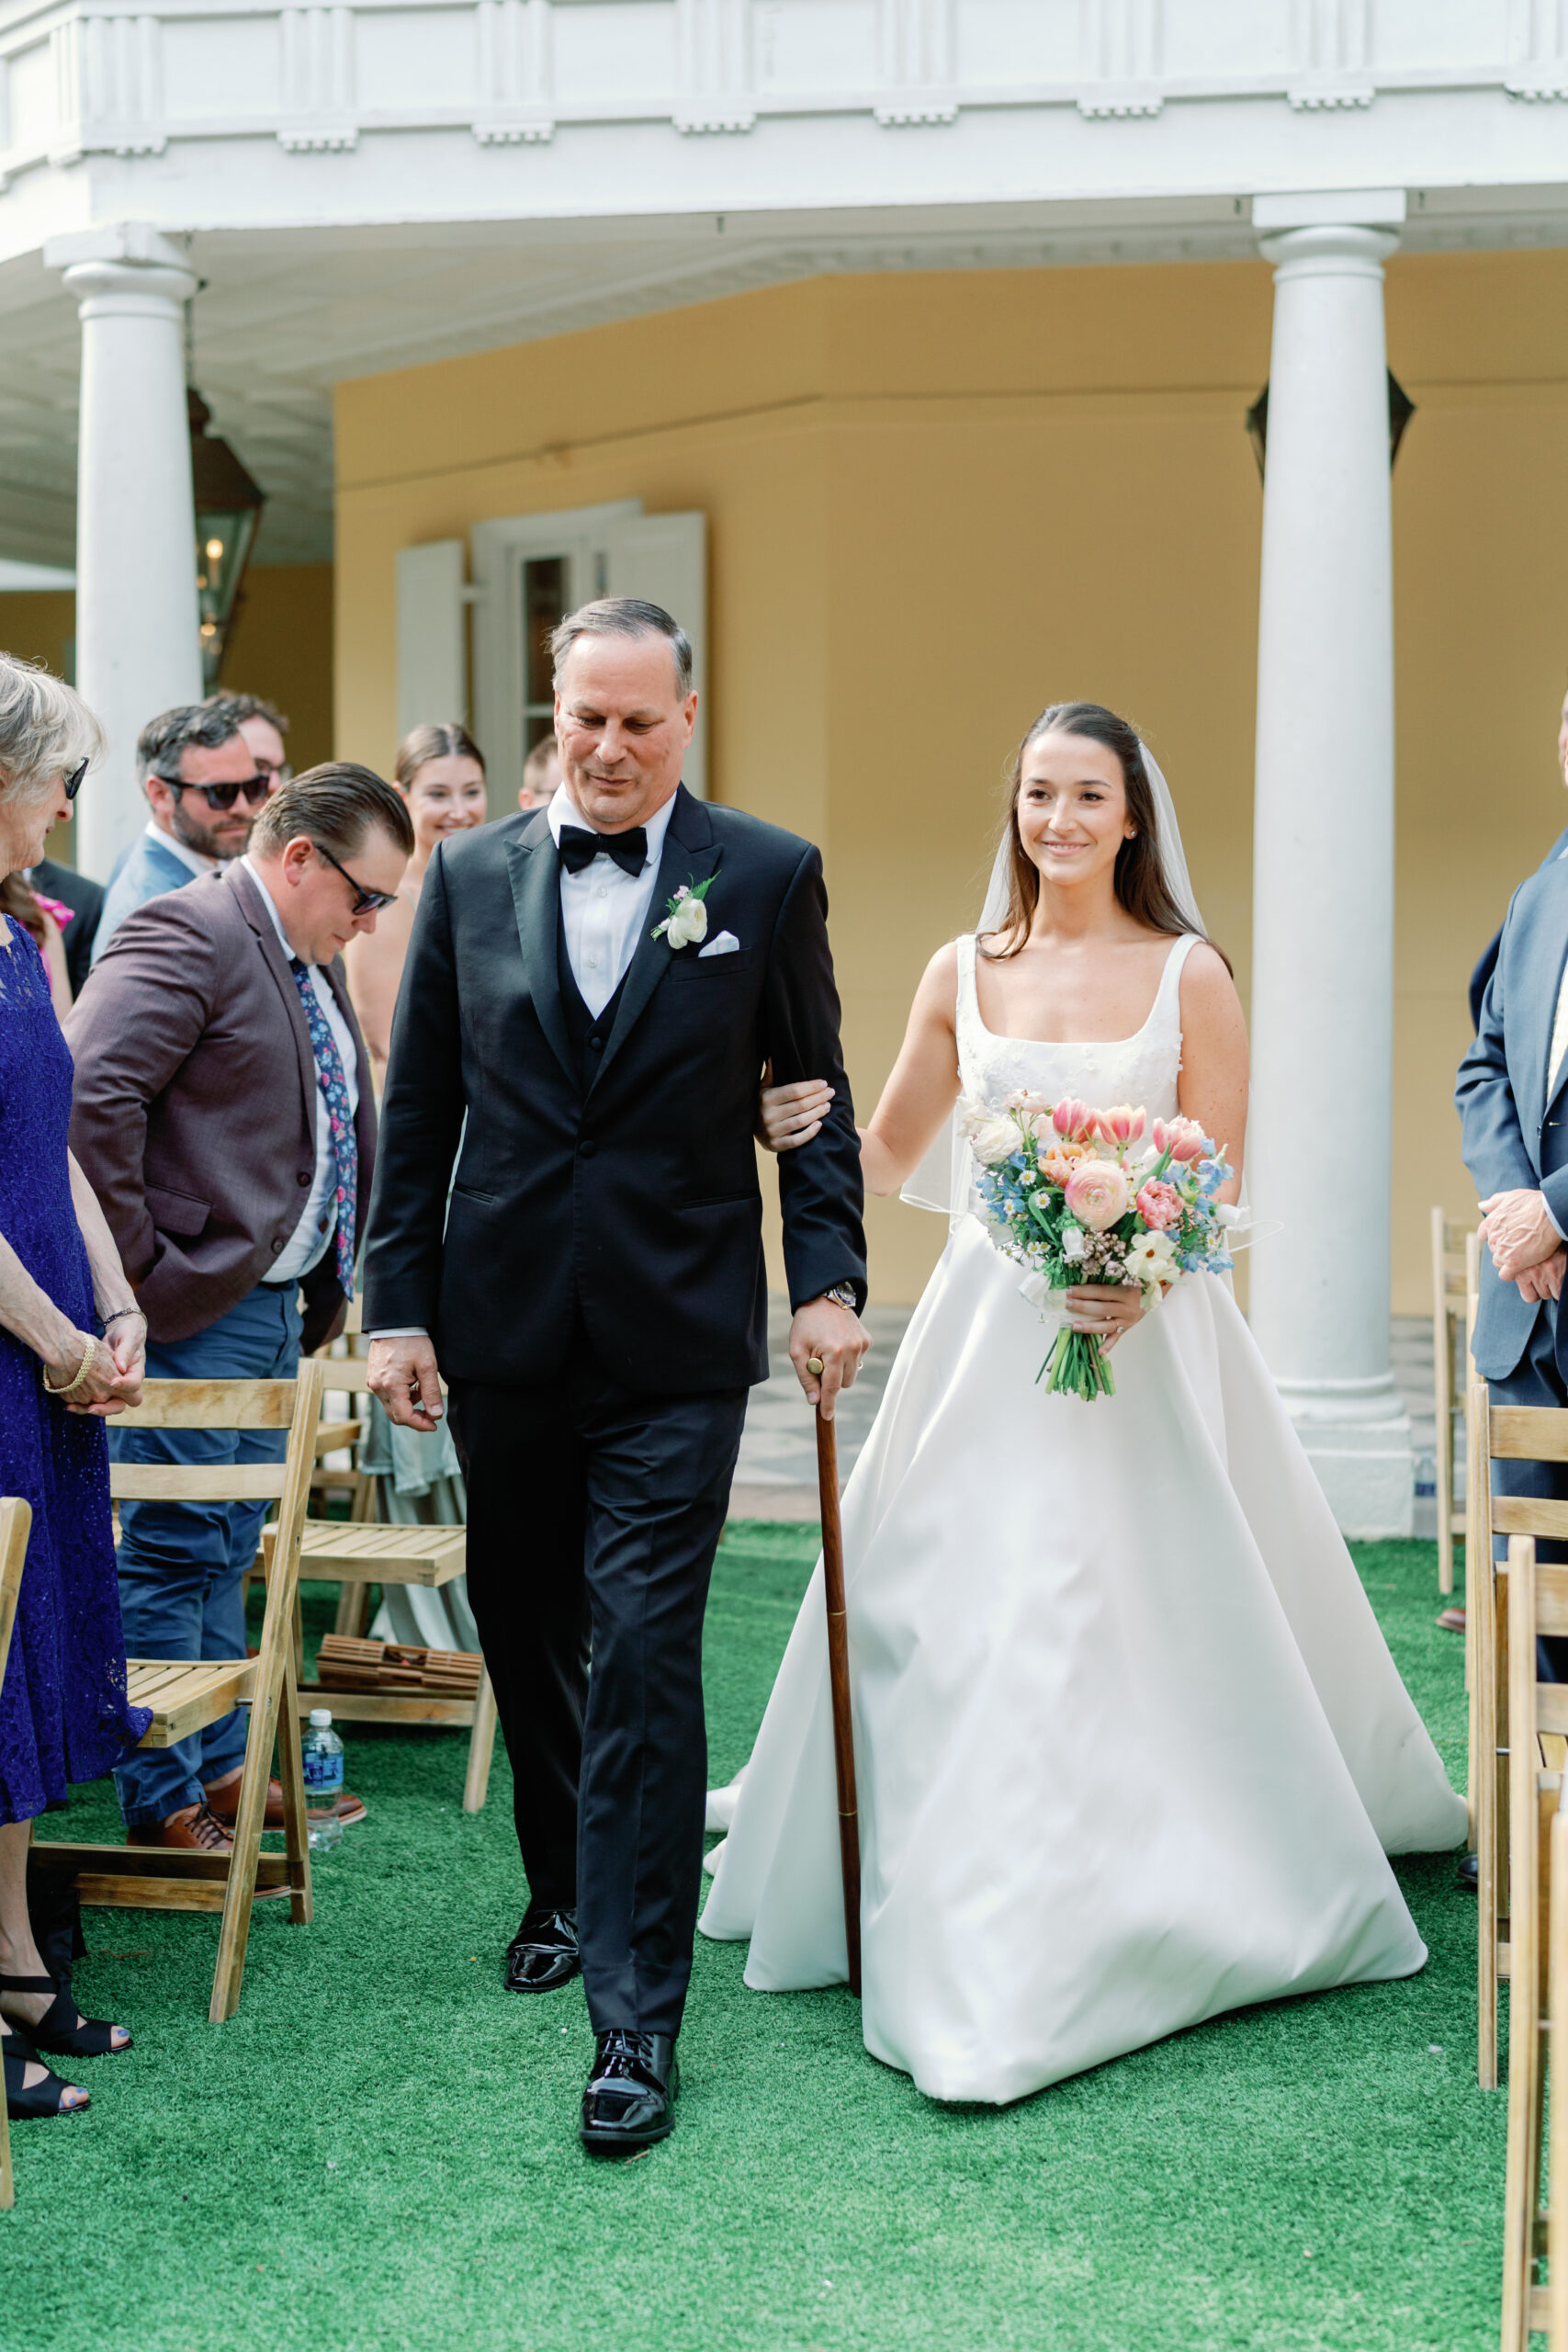 Bride walking up the aisle escorted by her dad with a cane. 